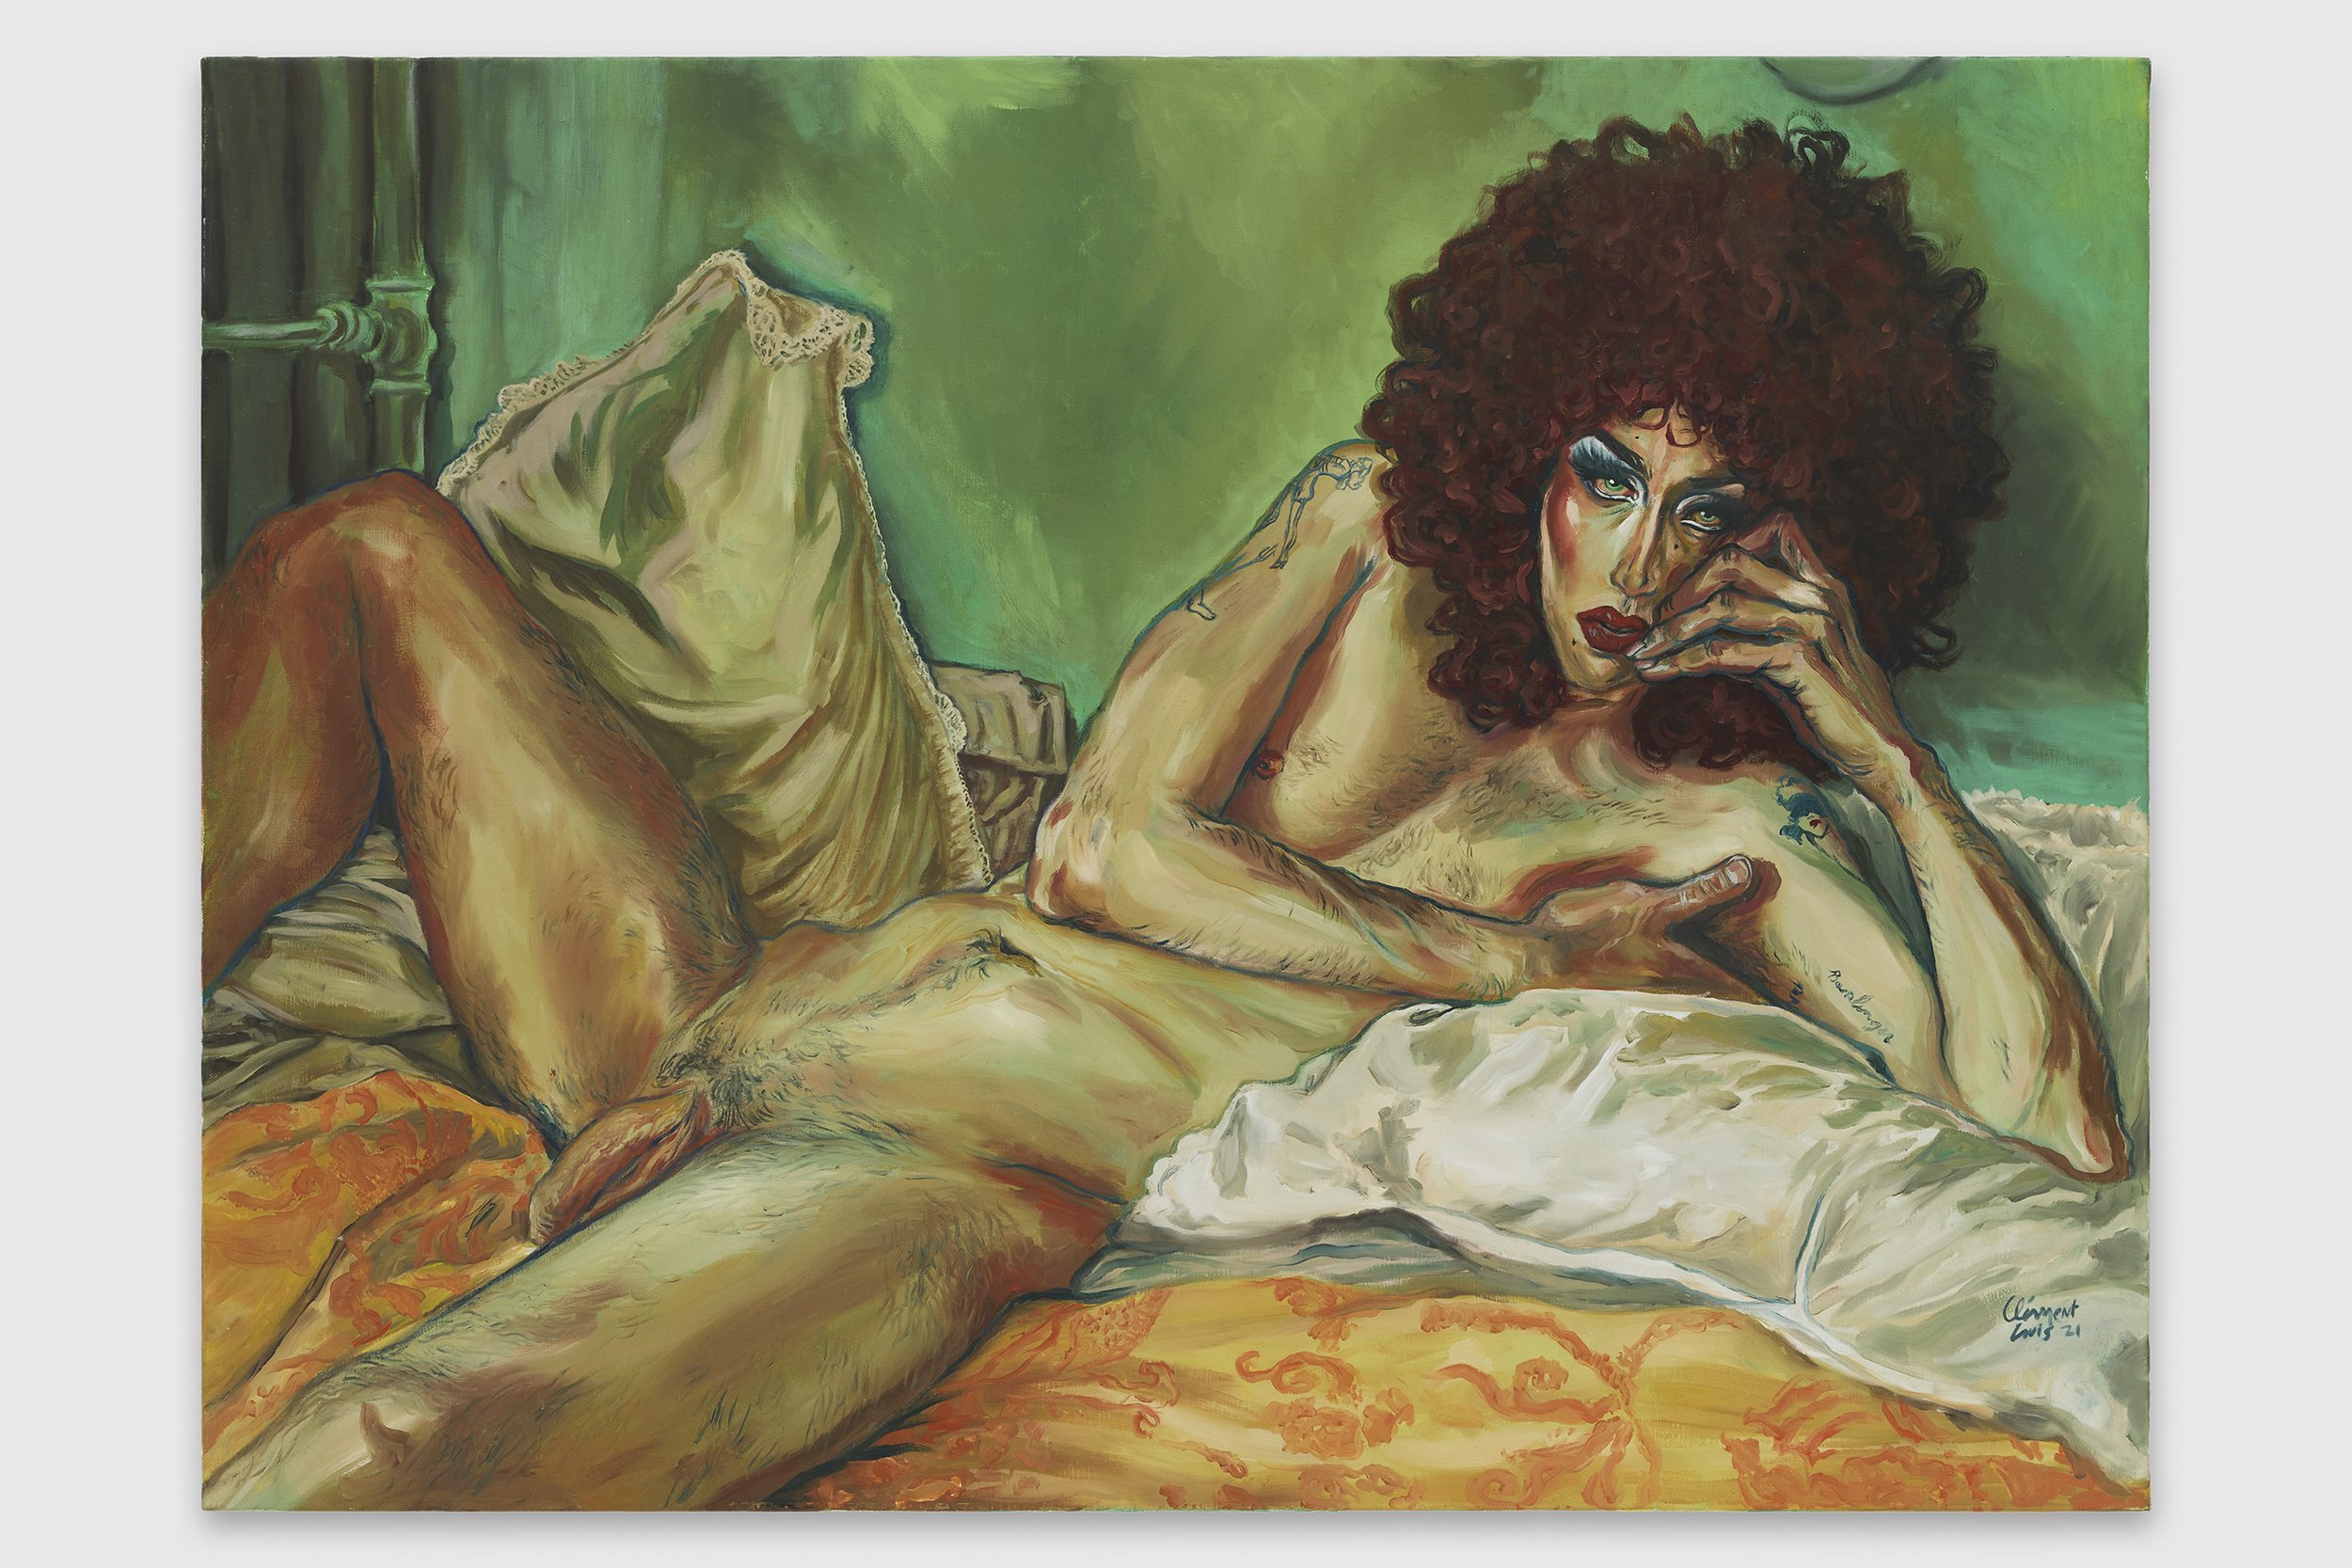  Paloma laying in her sheets, 2021   Huile sur toile  130 x 89 cm Unique &amp; original artwork  